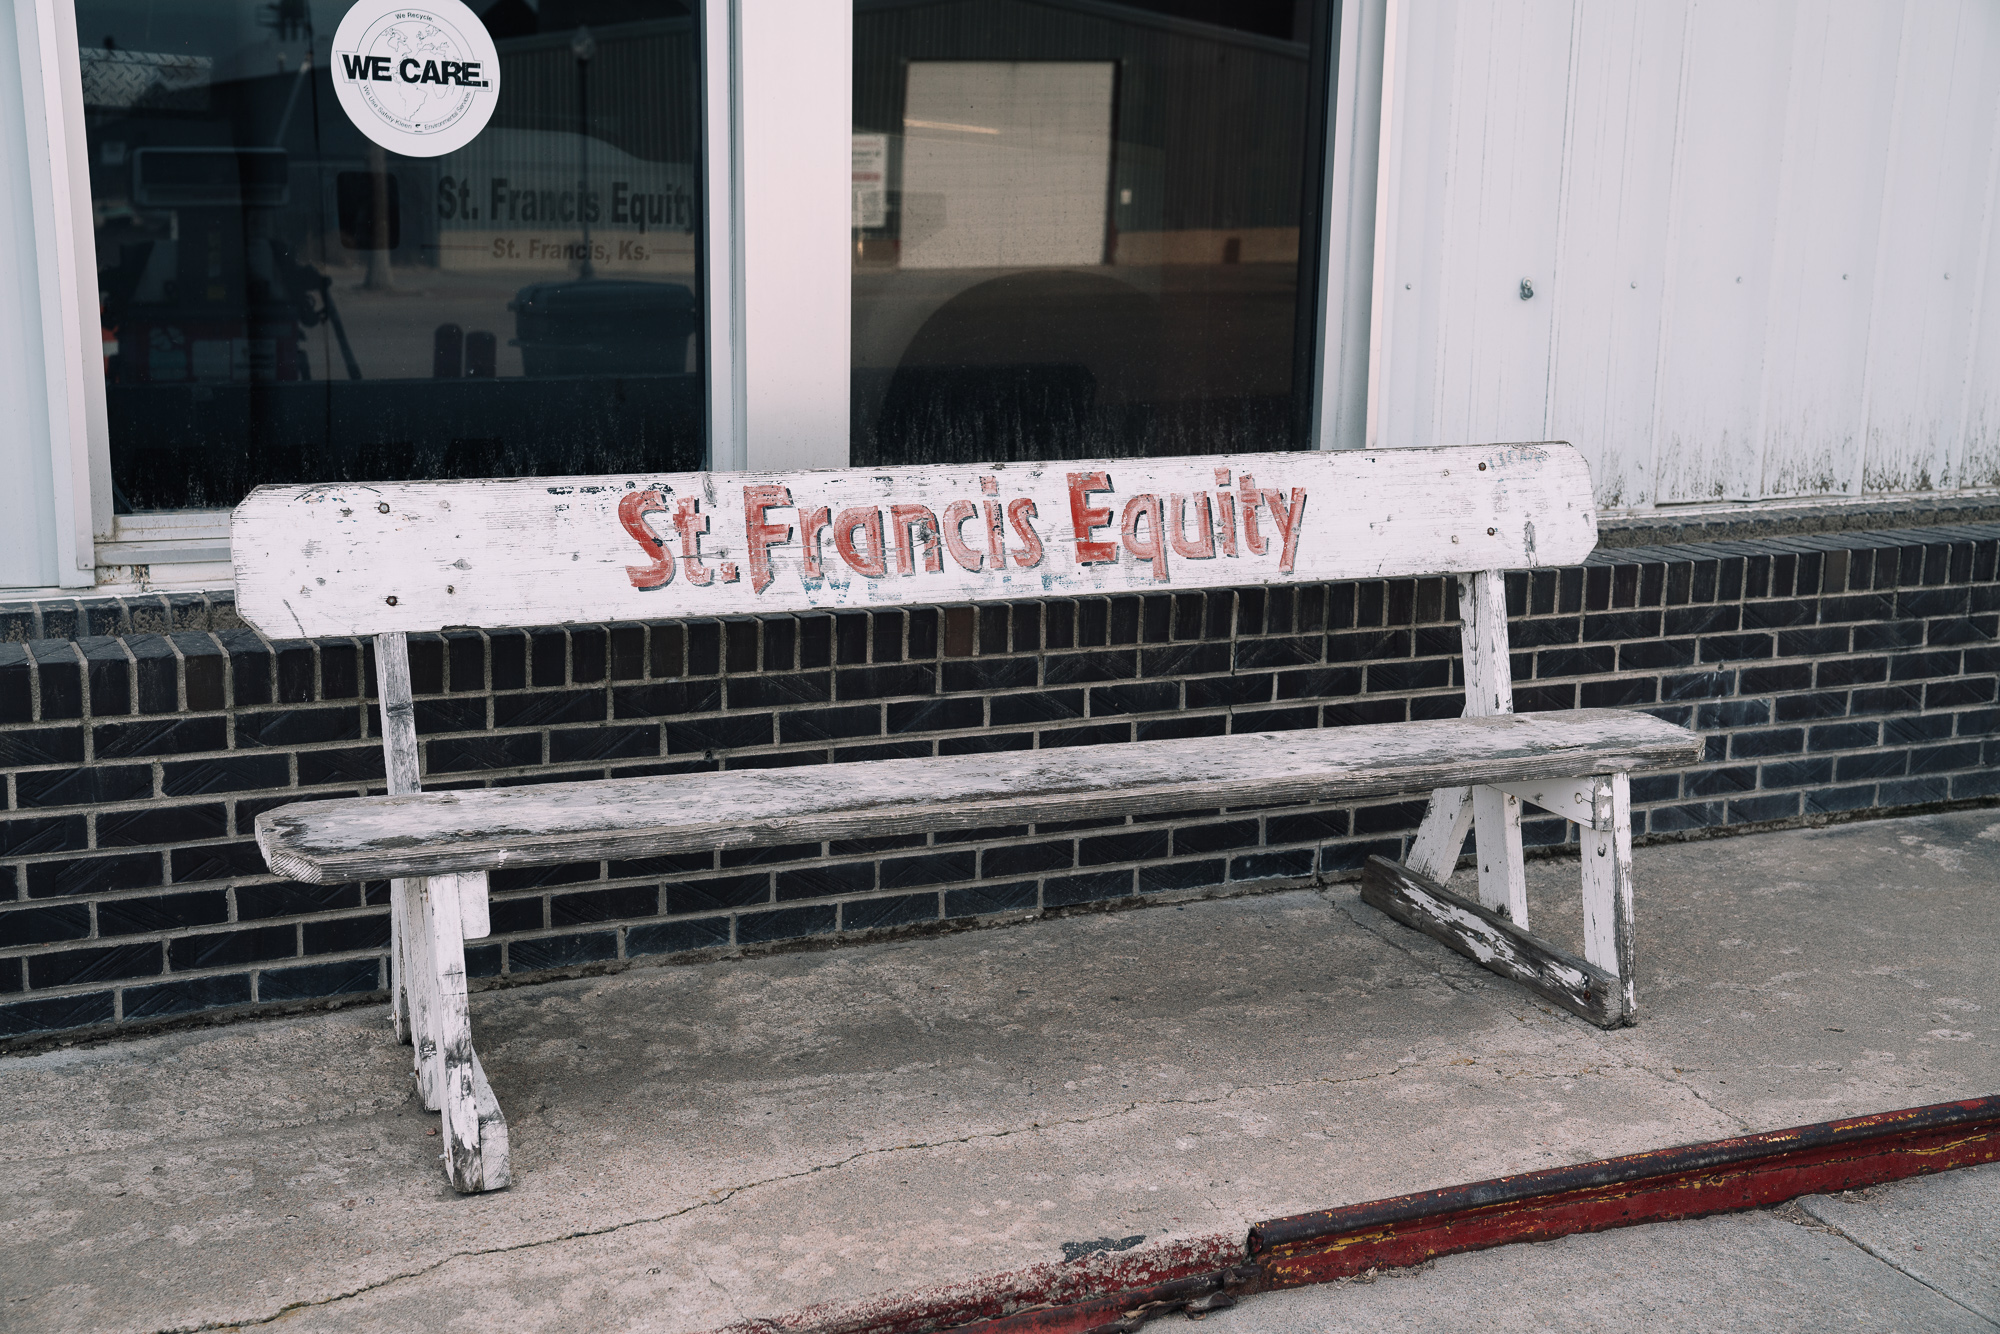 white bench with St. Francis written on it